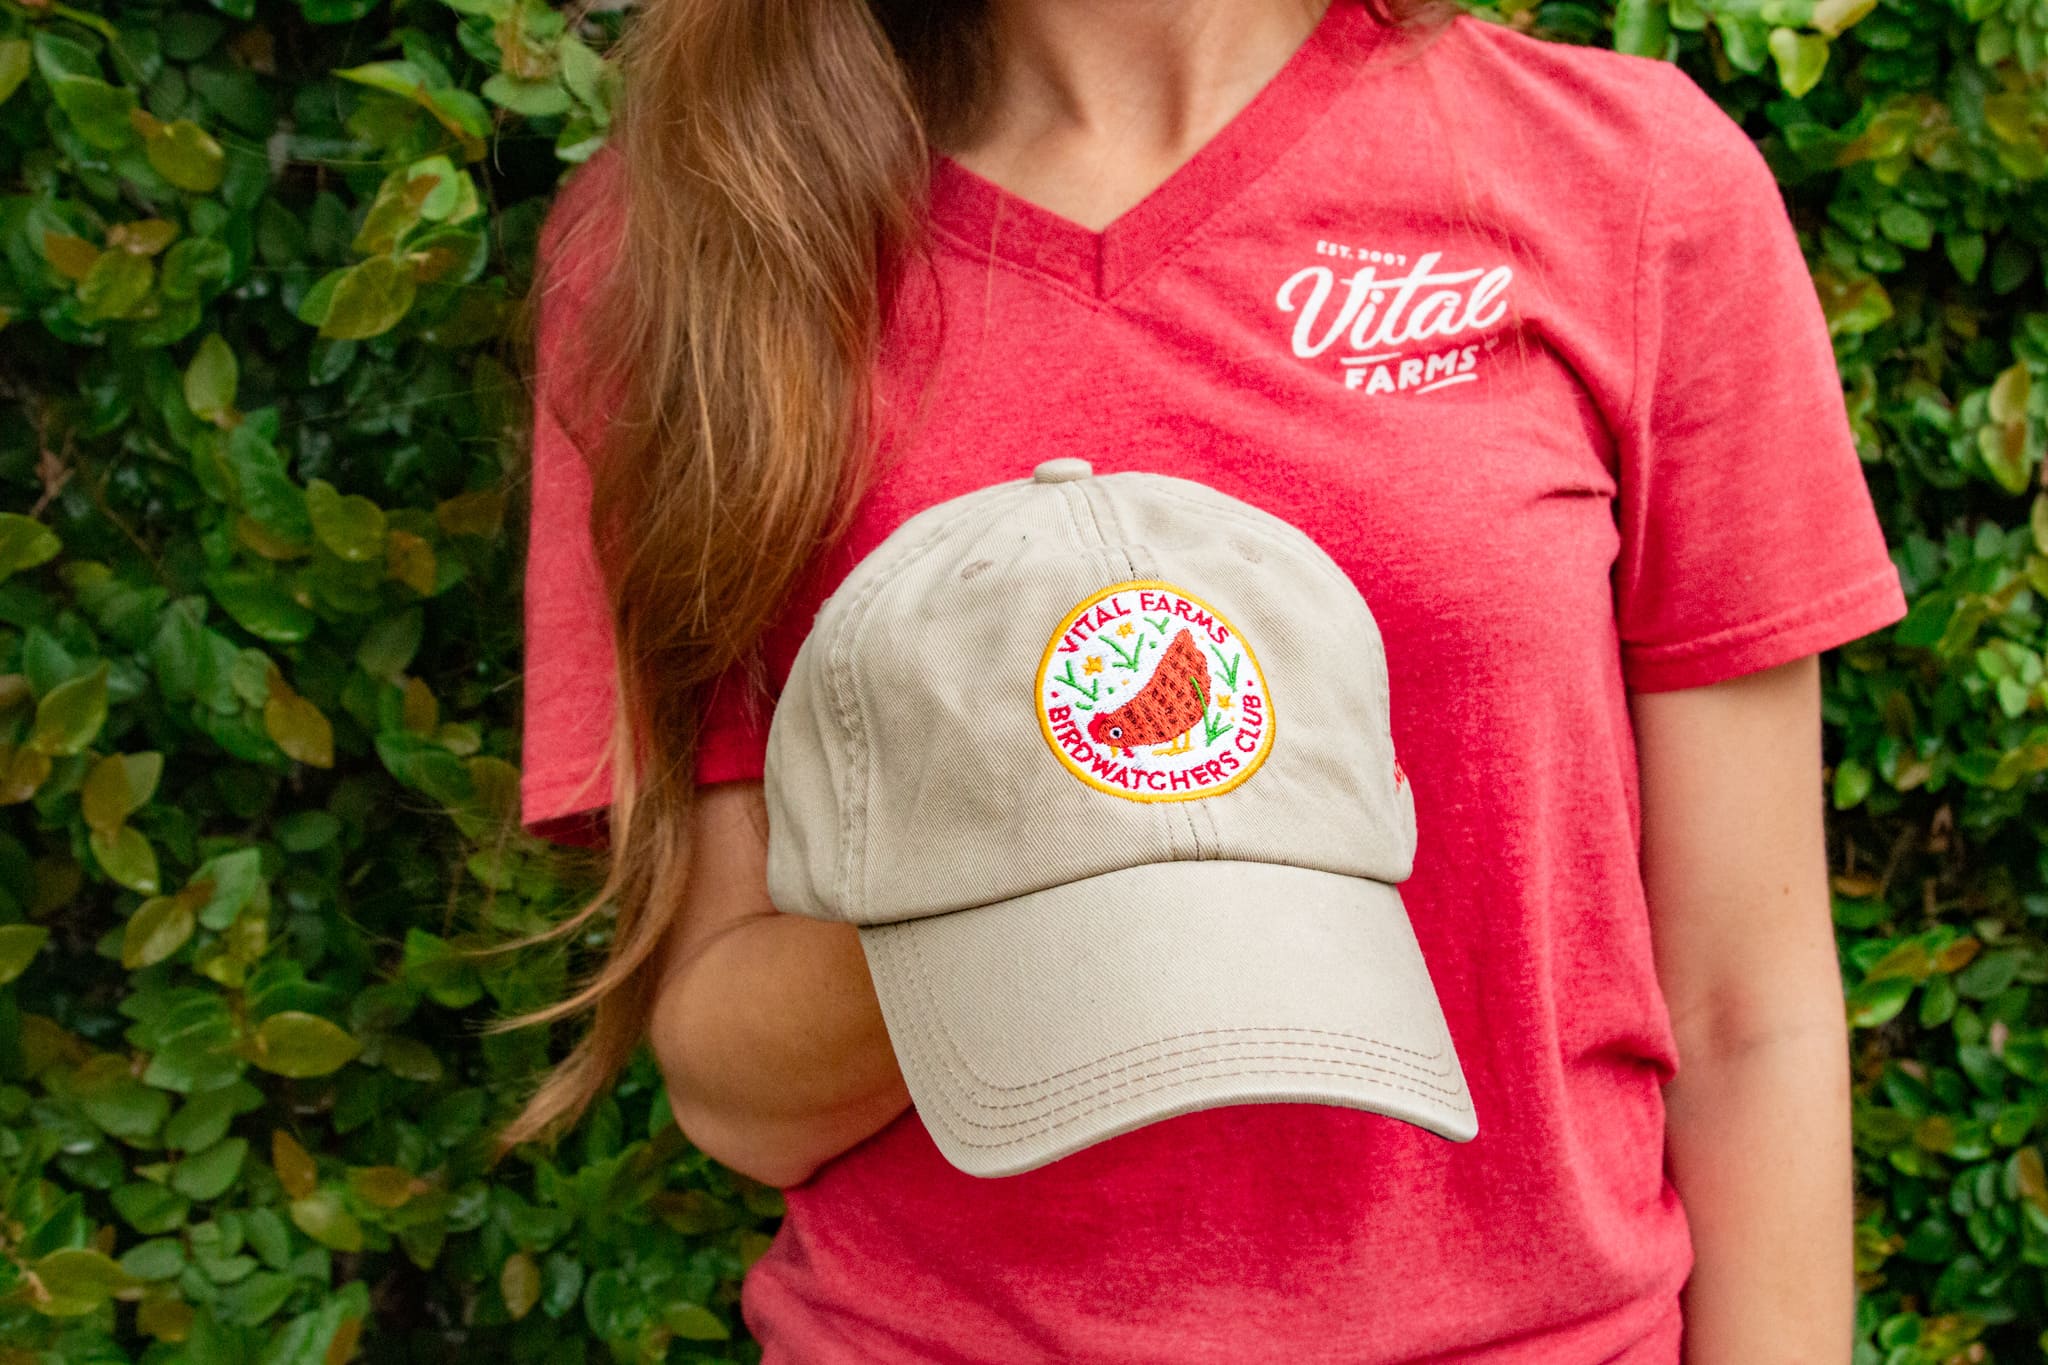 A woman in a red t-shirt with a vital farms logo holding a vital farms birdwatchers baseball cap.